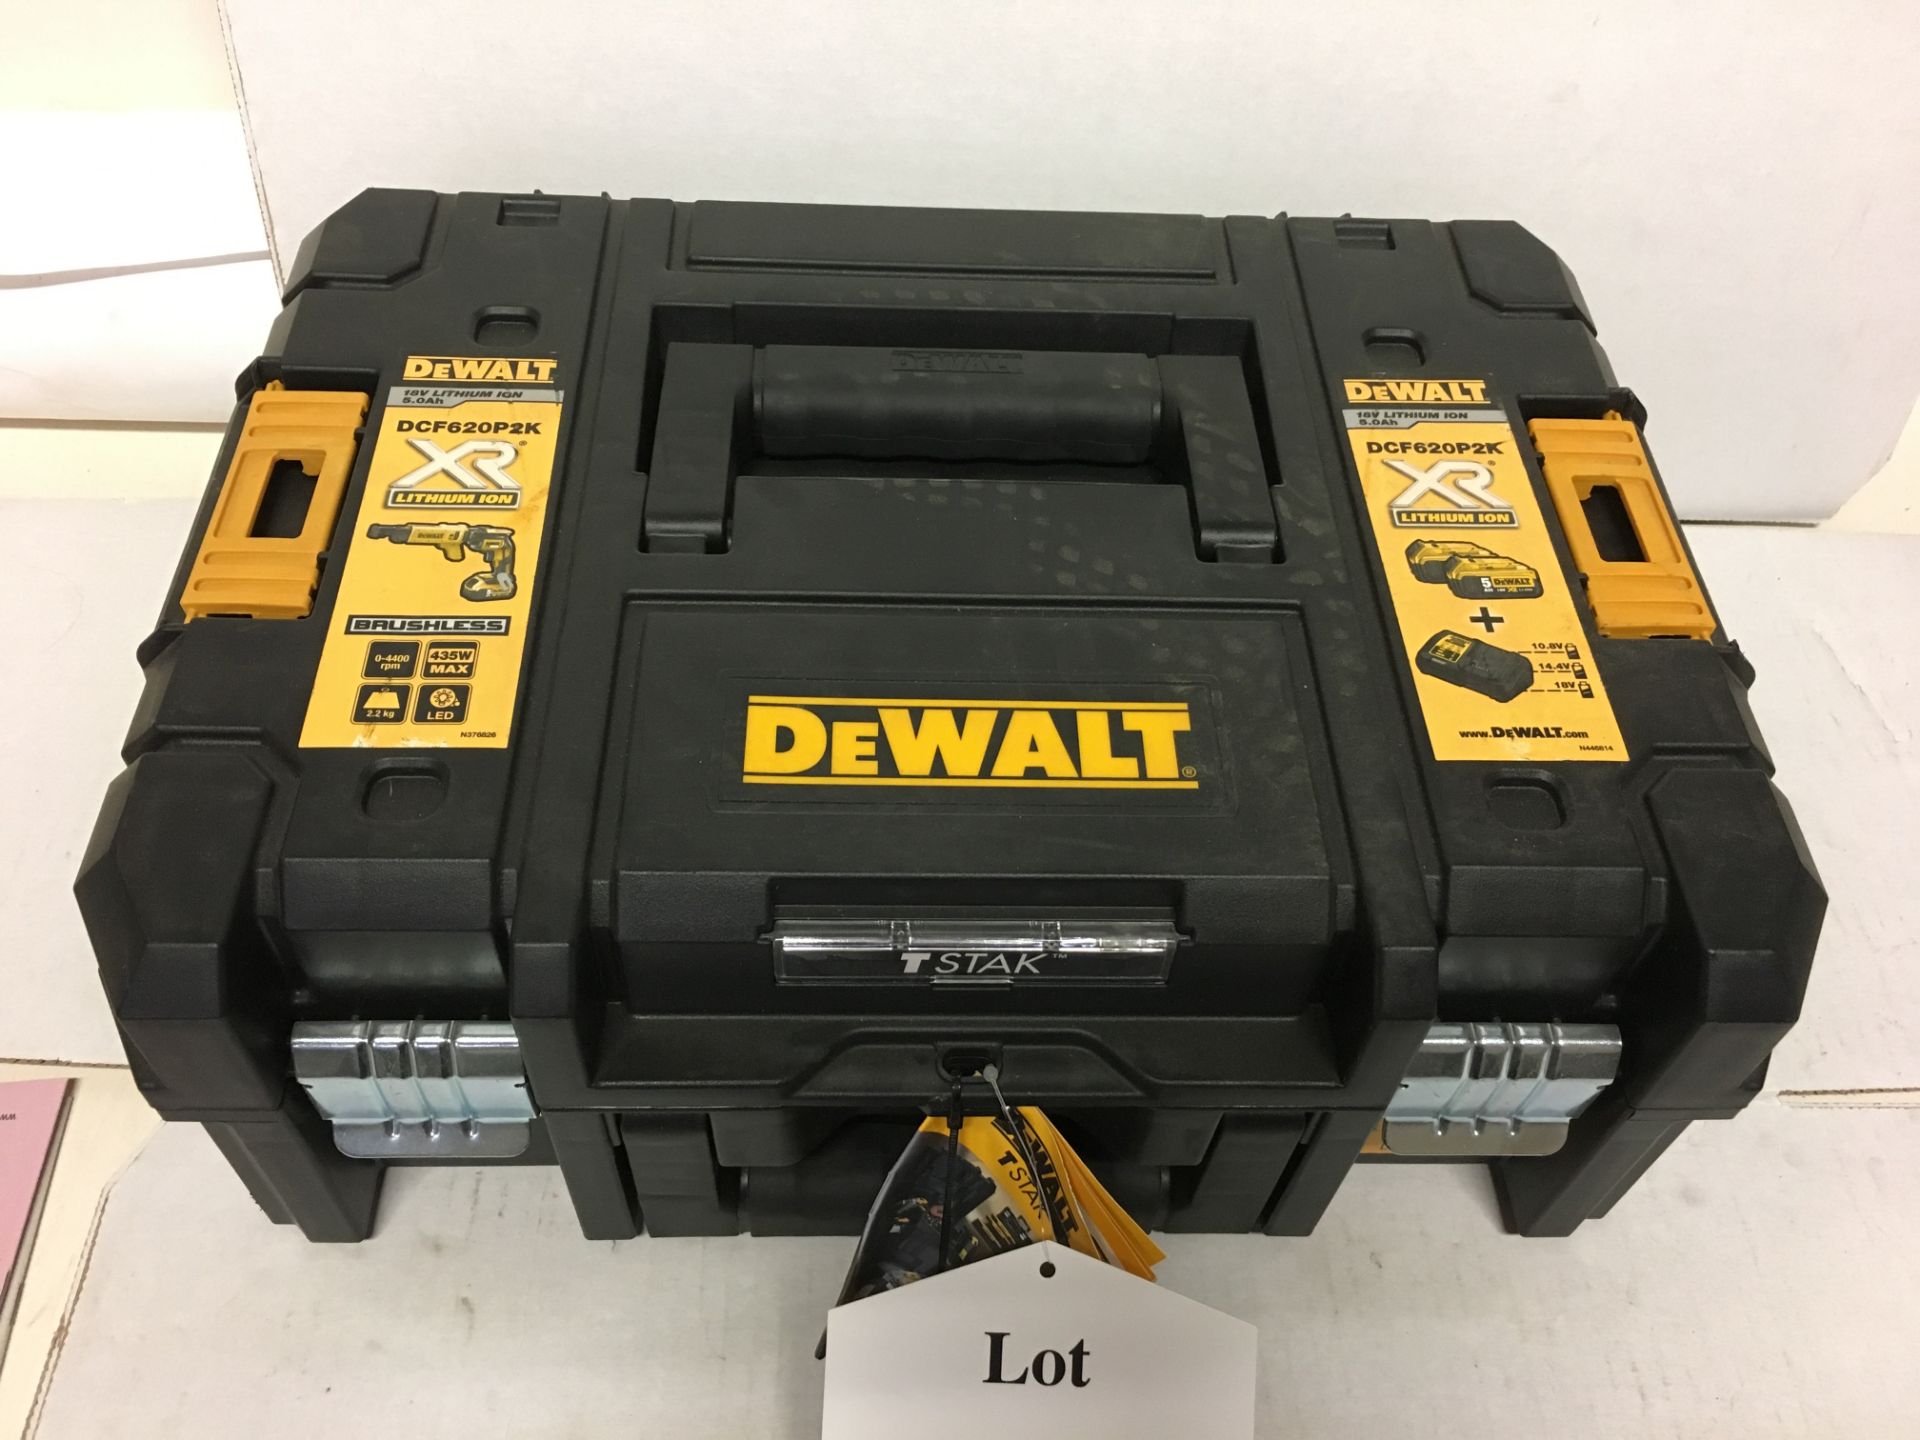 1 x Dewalt DCF620P2K-GB Collated Drywall Screwdriver 18V Cordless Brushless (2 x 5.0Ah Batteries), 1 - Image 2 of 3